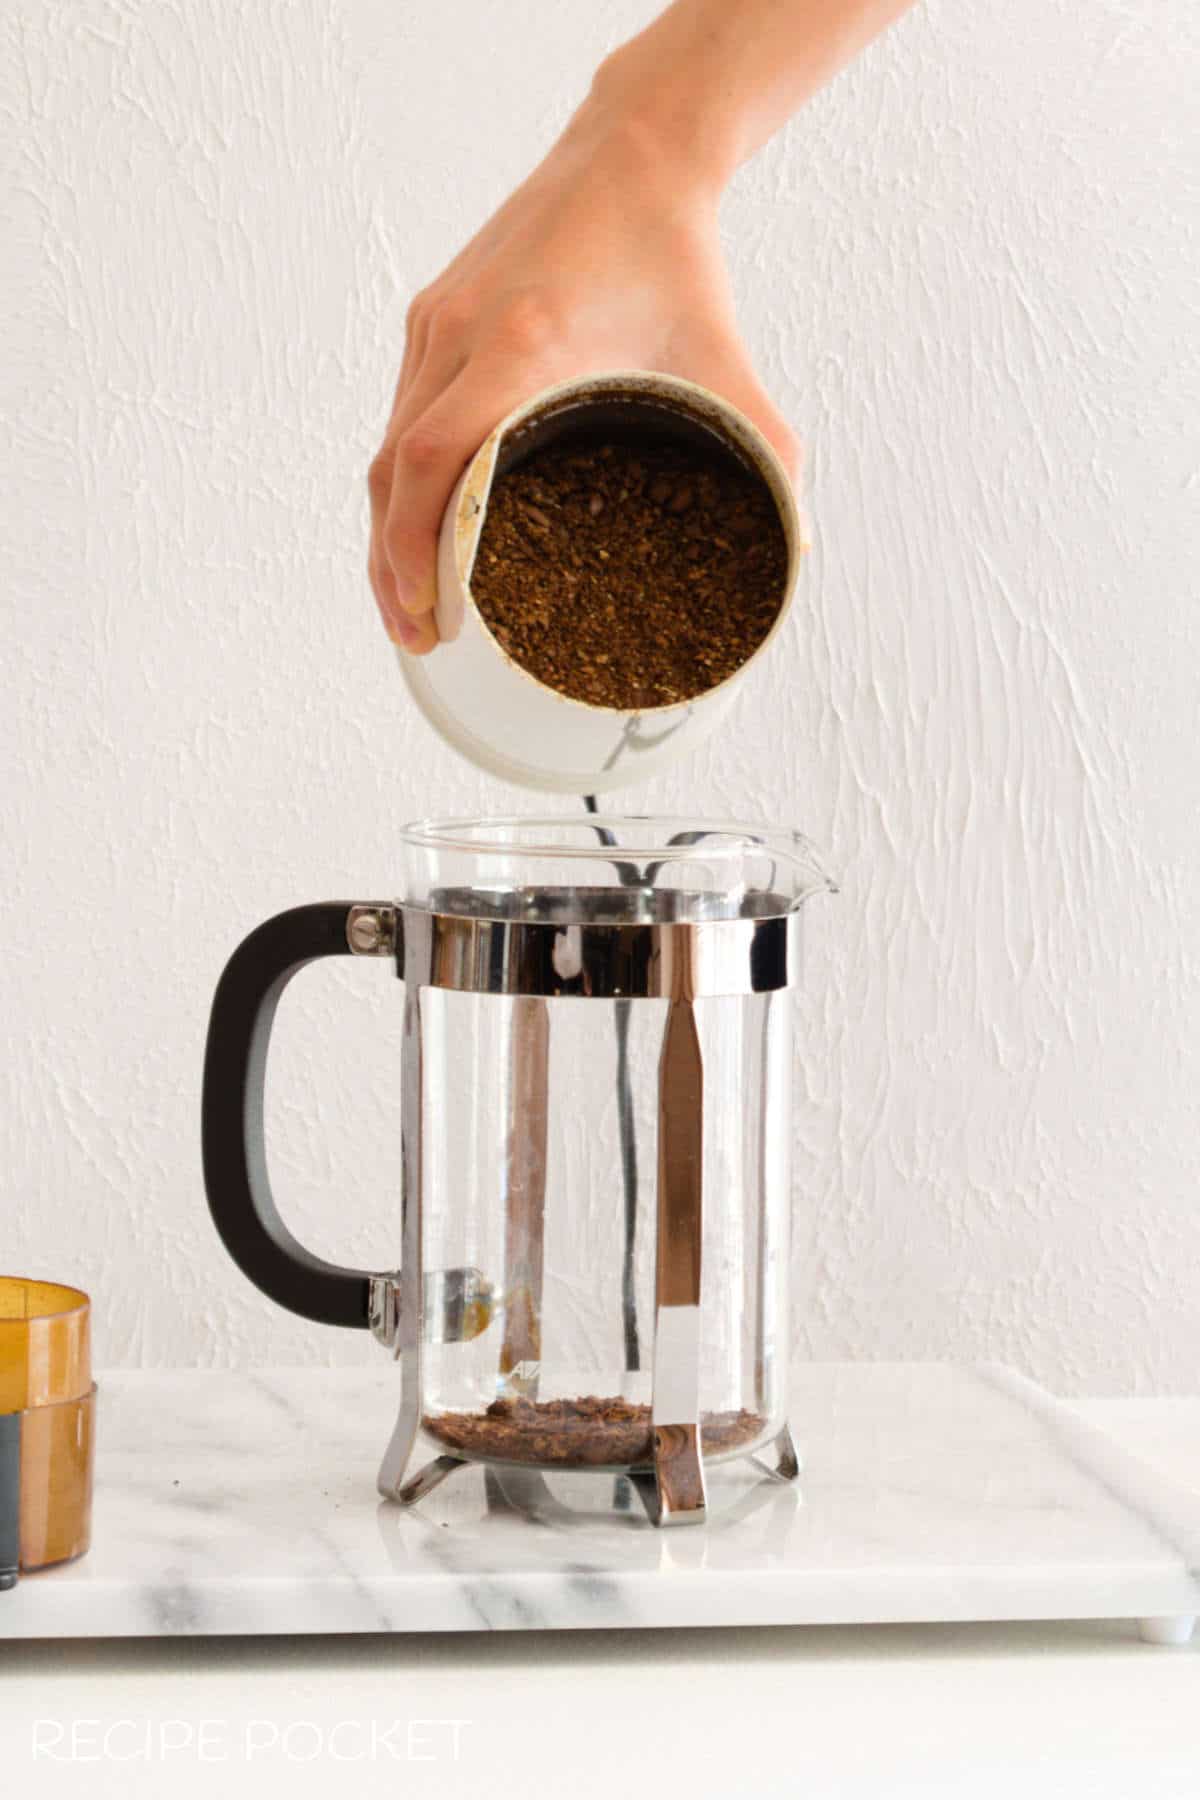 Ground coffee beans being put into a French press.